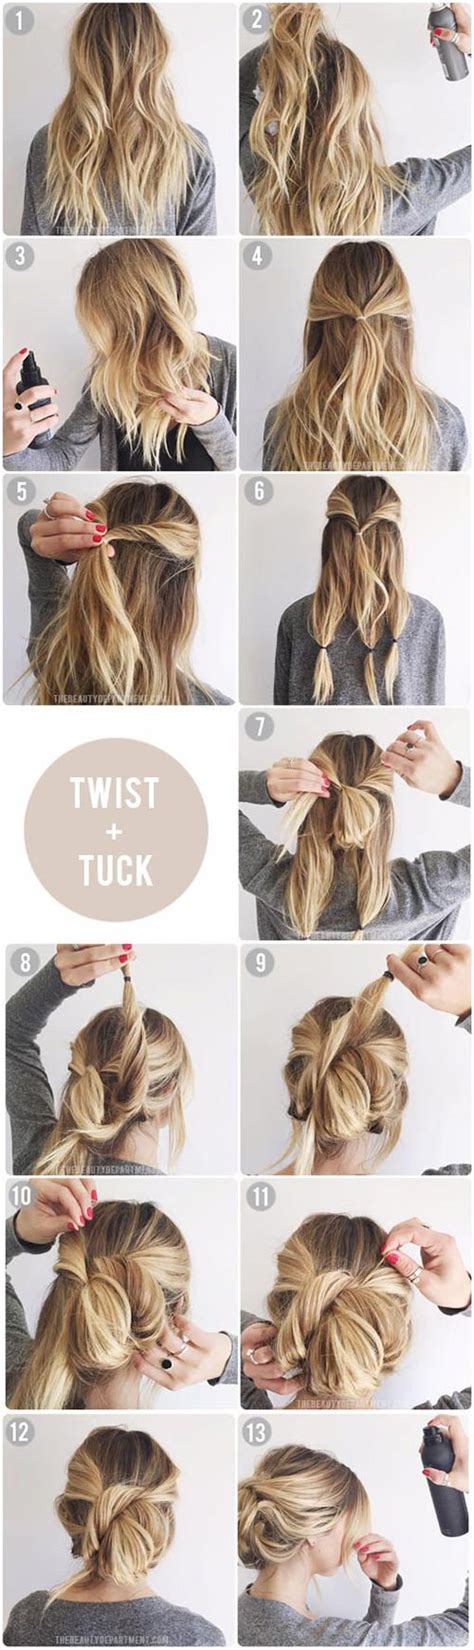 easy messy hairstyles  tutorials  rock  day